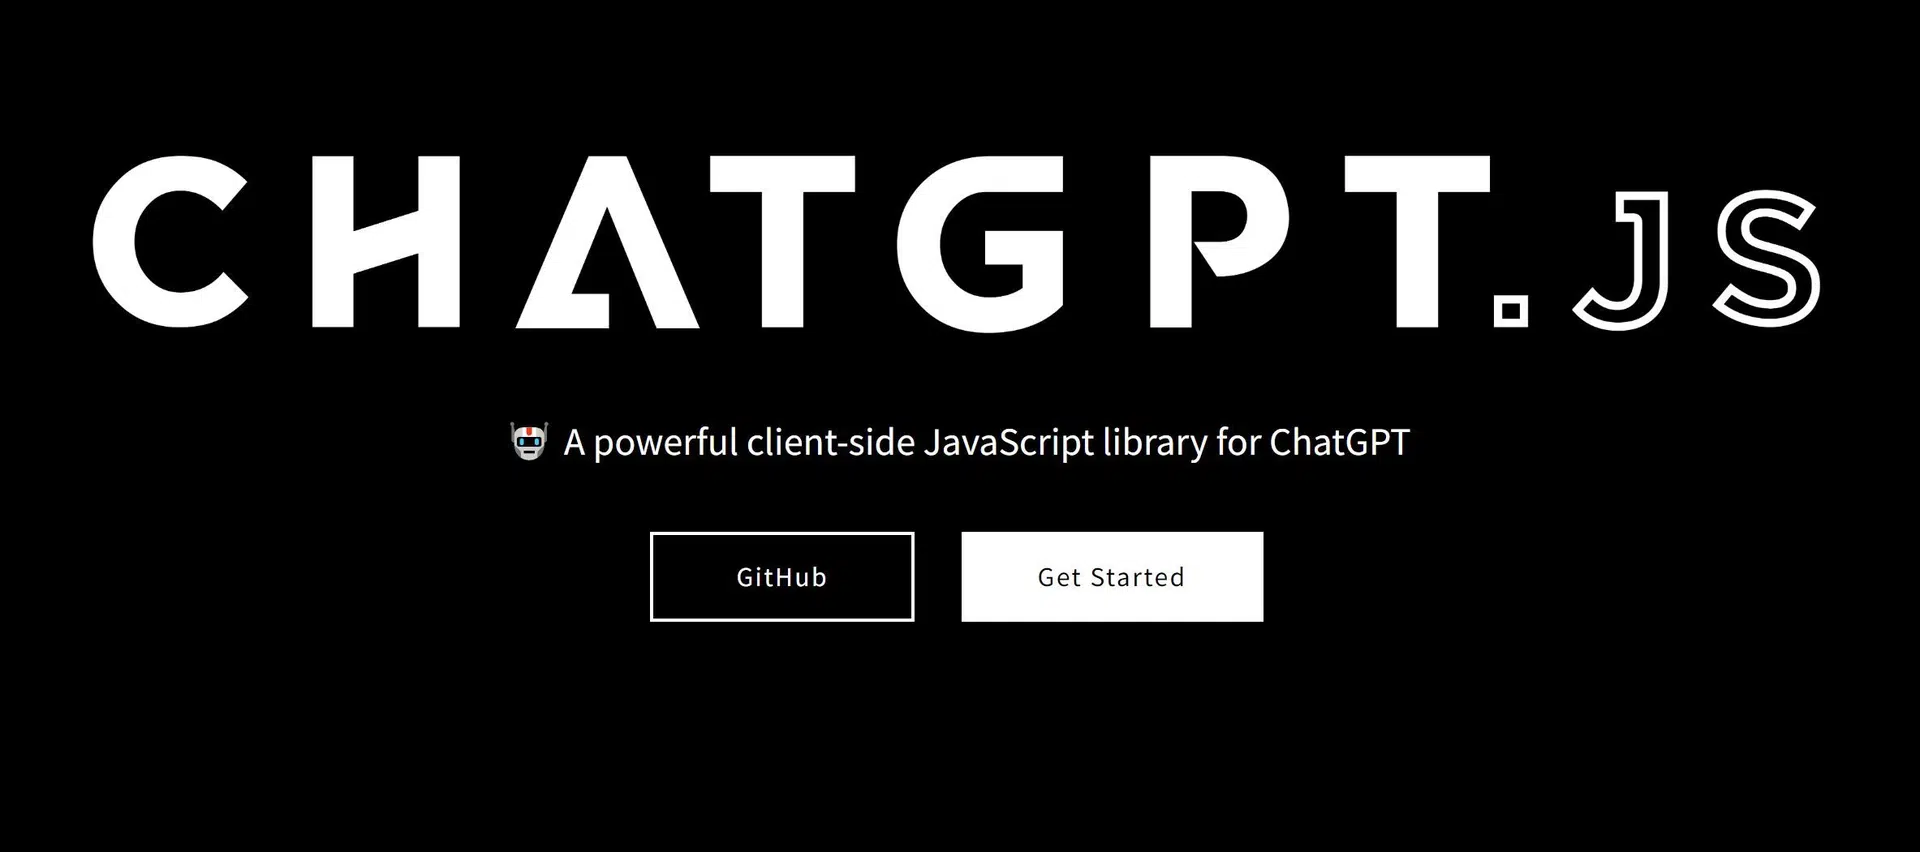 Chatgpt.jswebsite picture